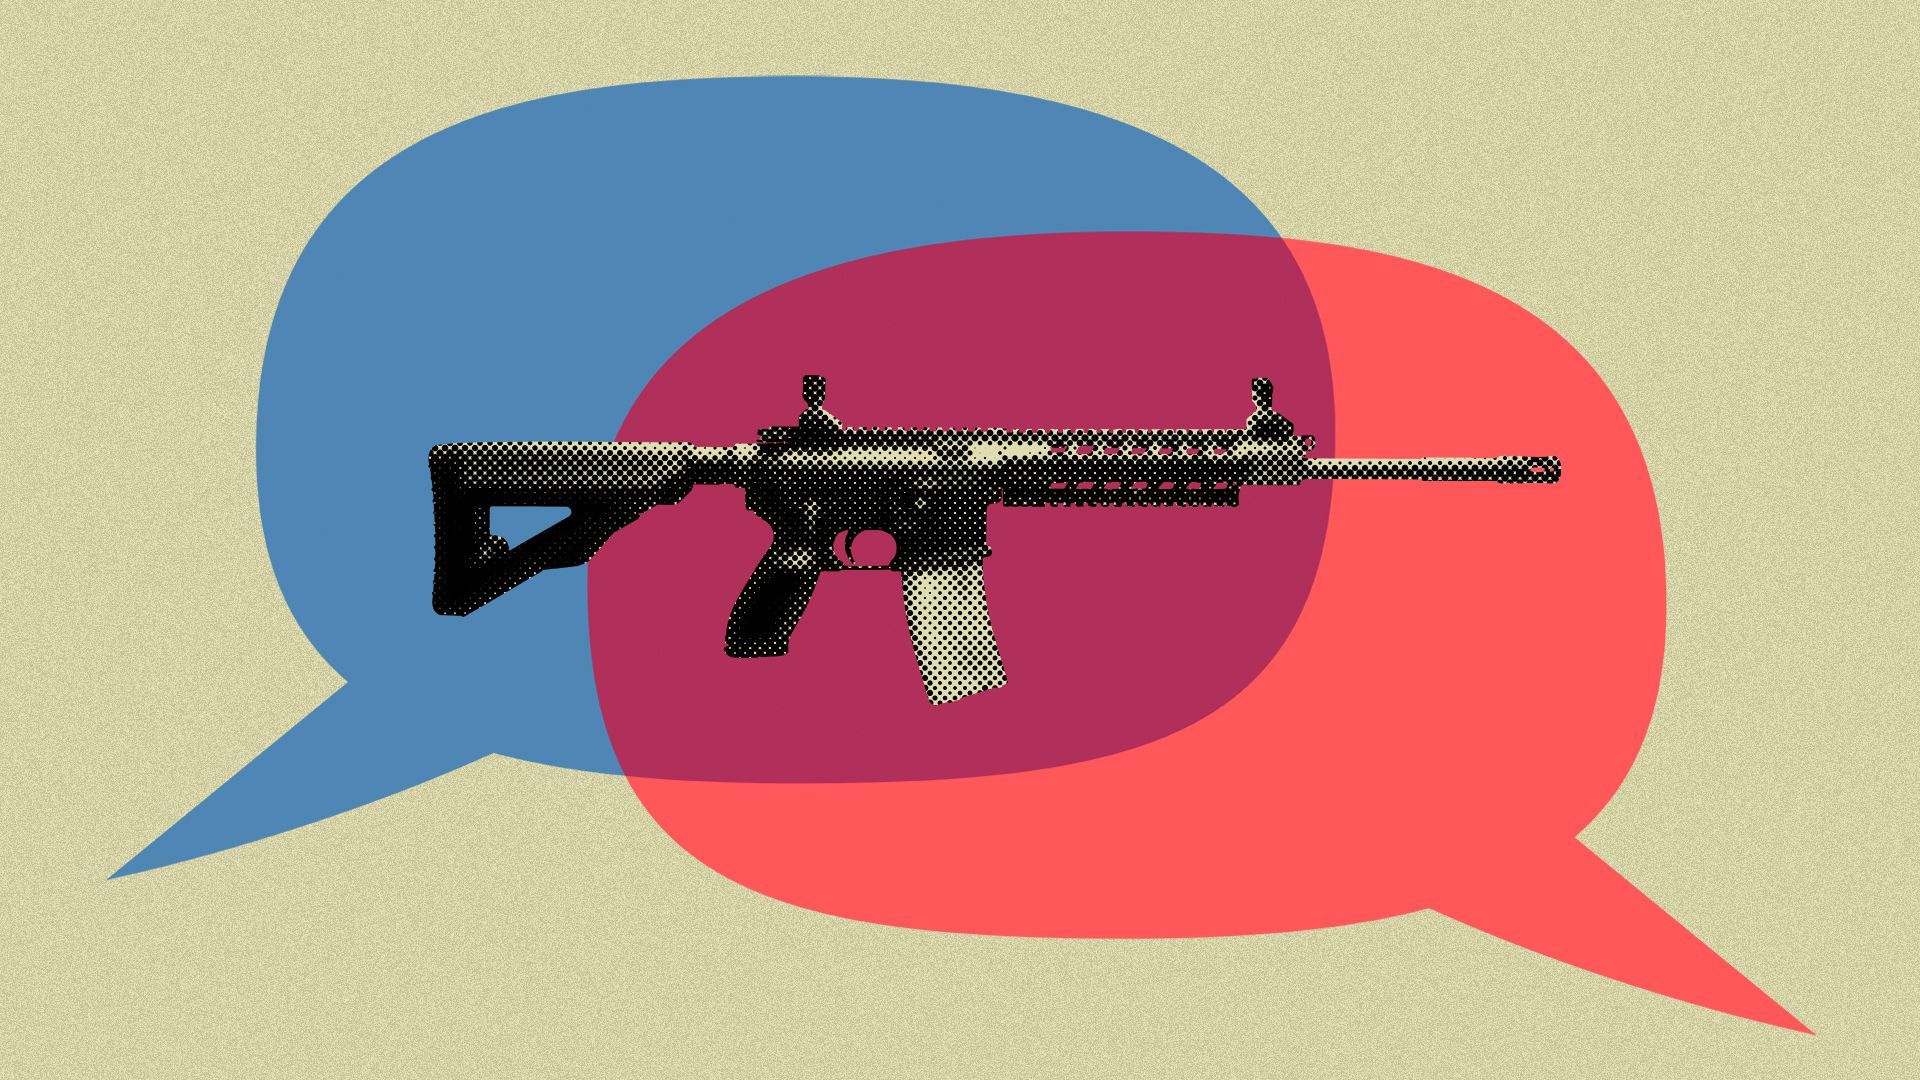 Illustration of a blue word balloon overlaid with a red word balloon, and a rifle in both of them.